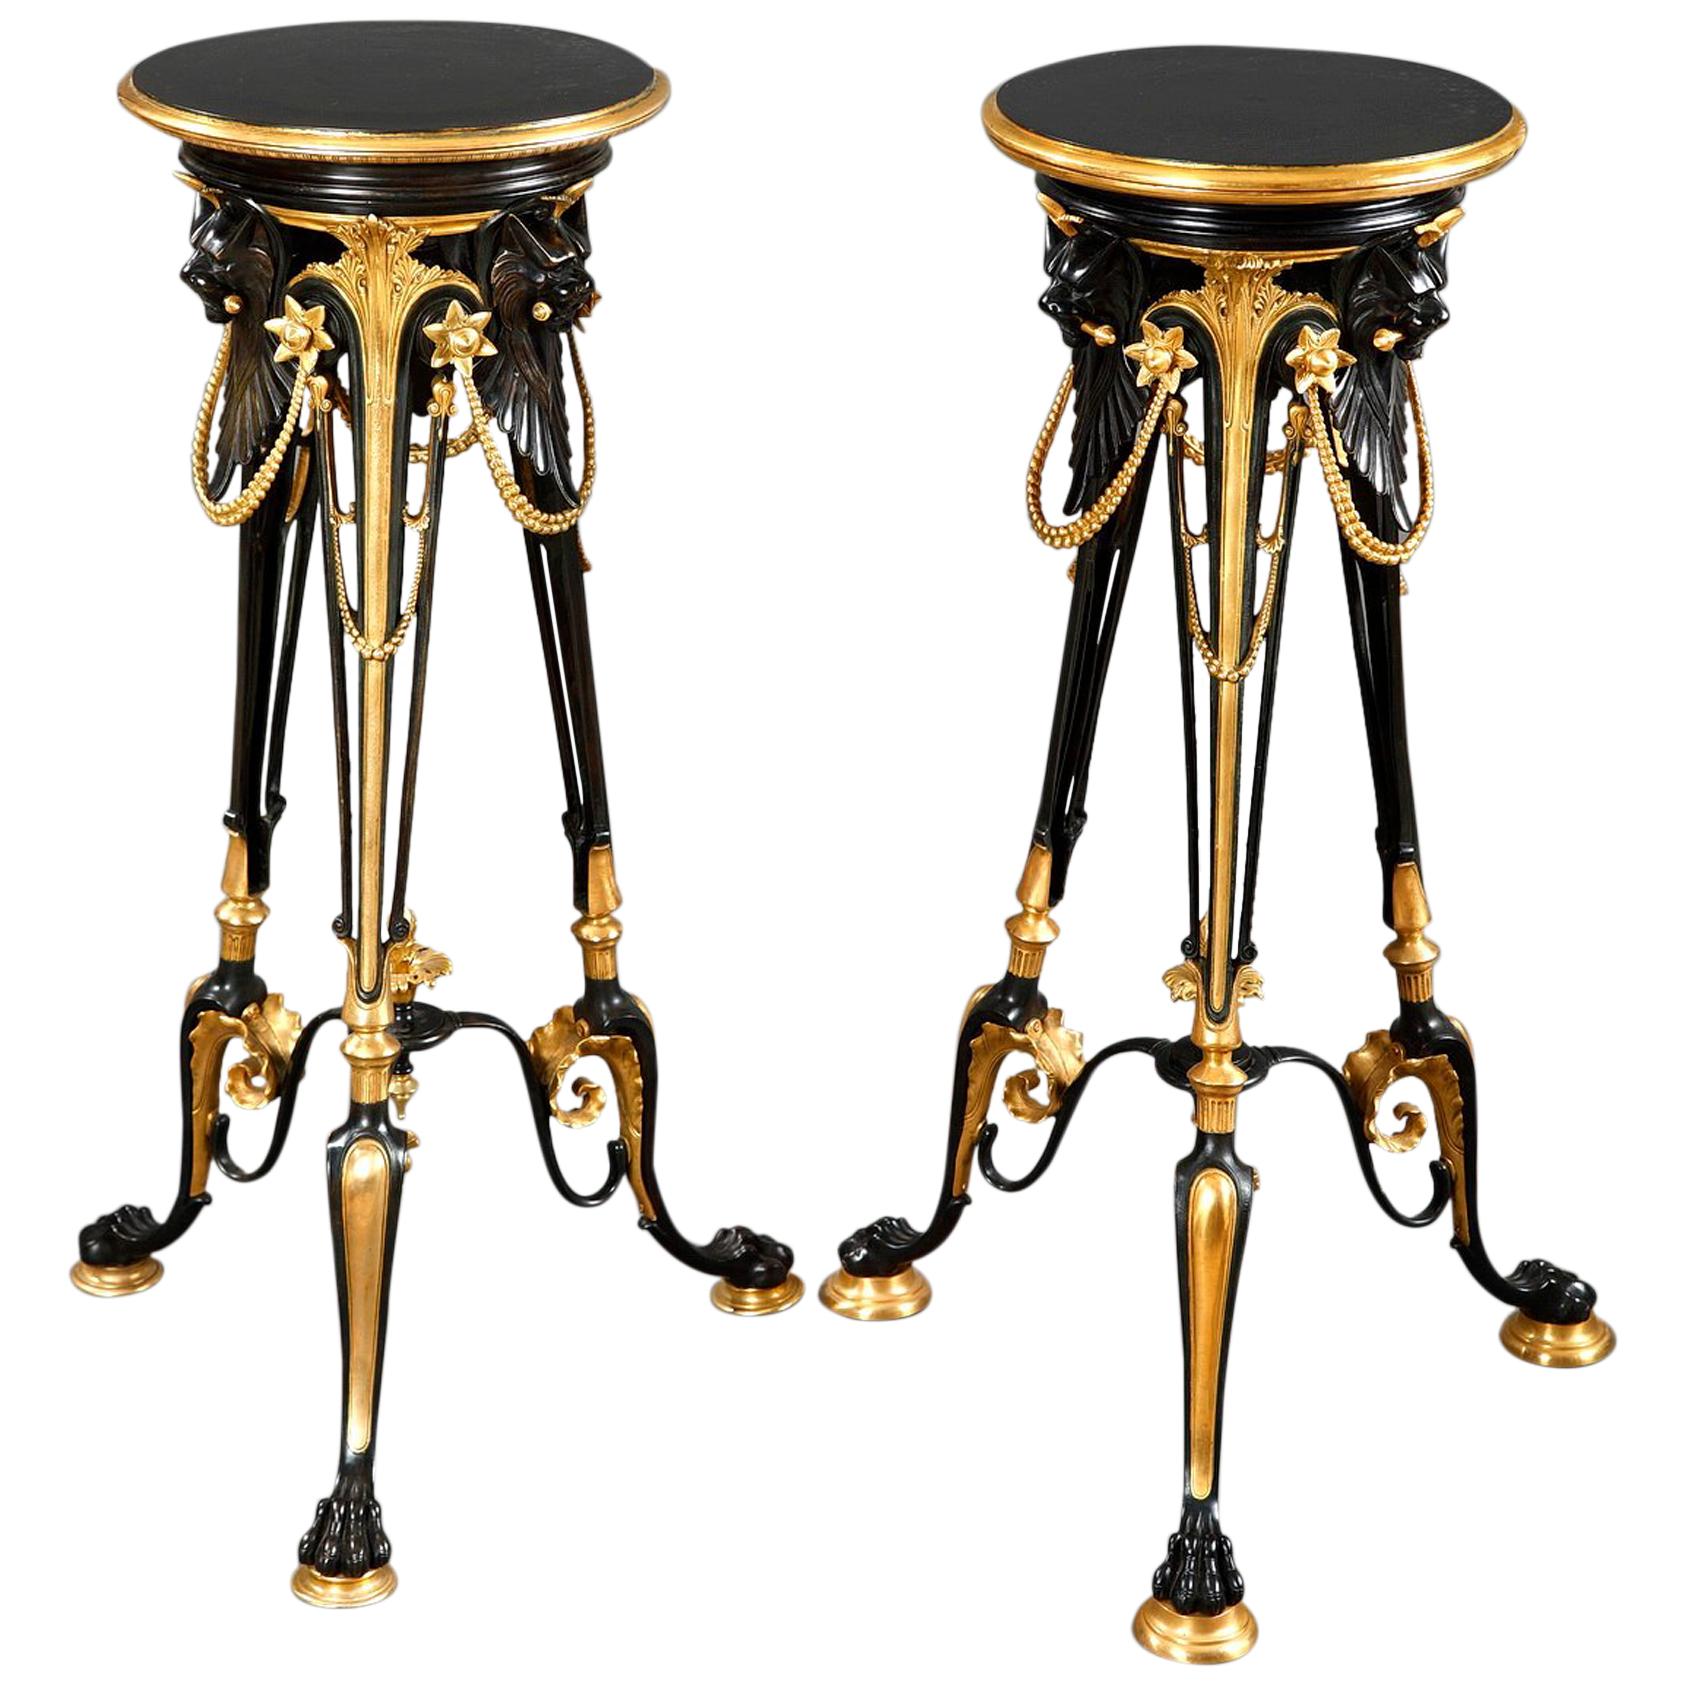 Elegant Pair of Neo-Greek Bronze Stands Attributed to G. Servant